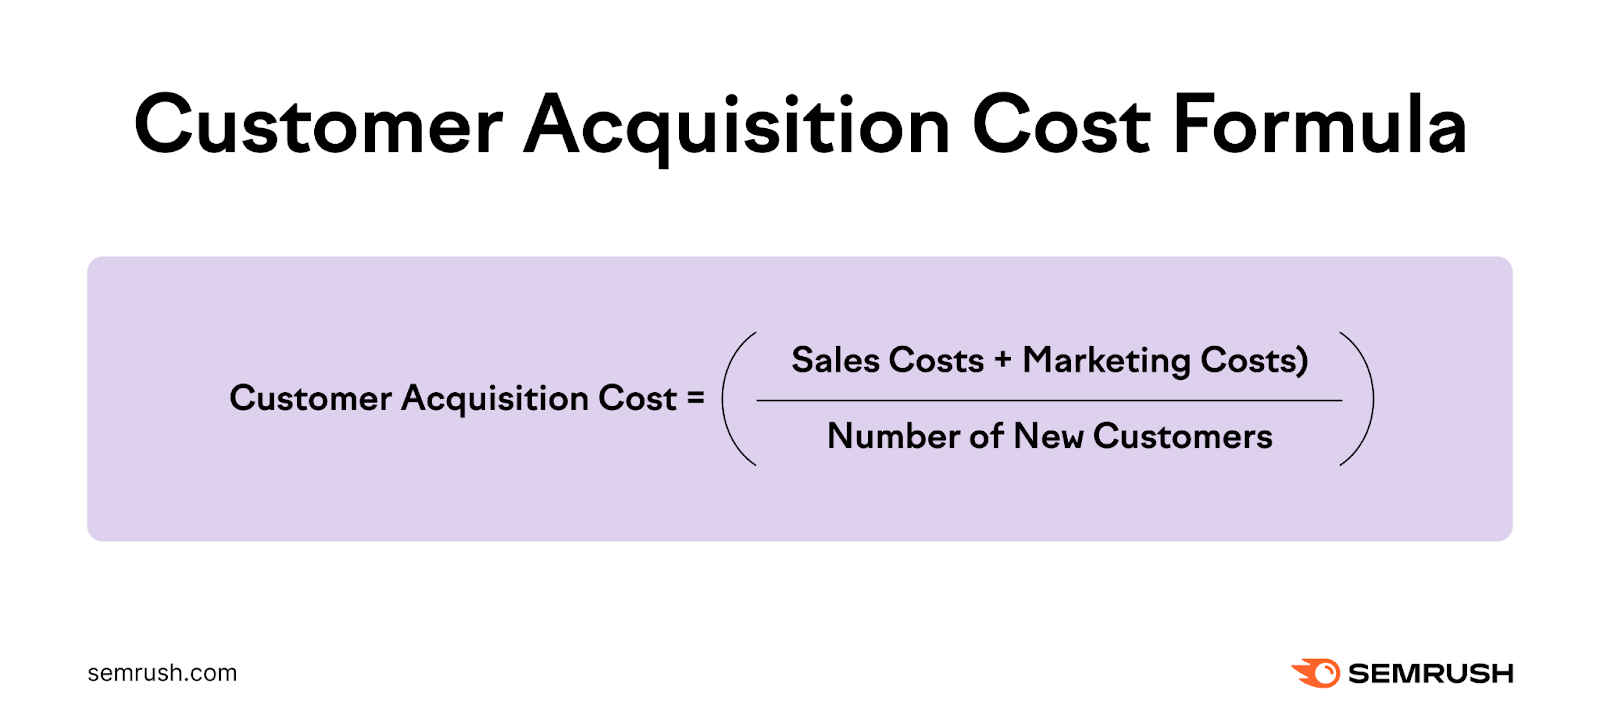 Customer acquisition outgo  is adjacent   to income  costs + selling  costs divided by fig   of caller   customers.